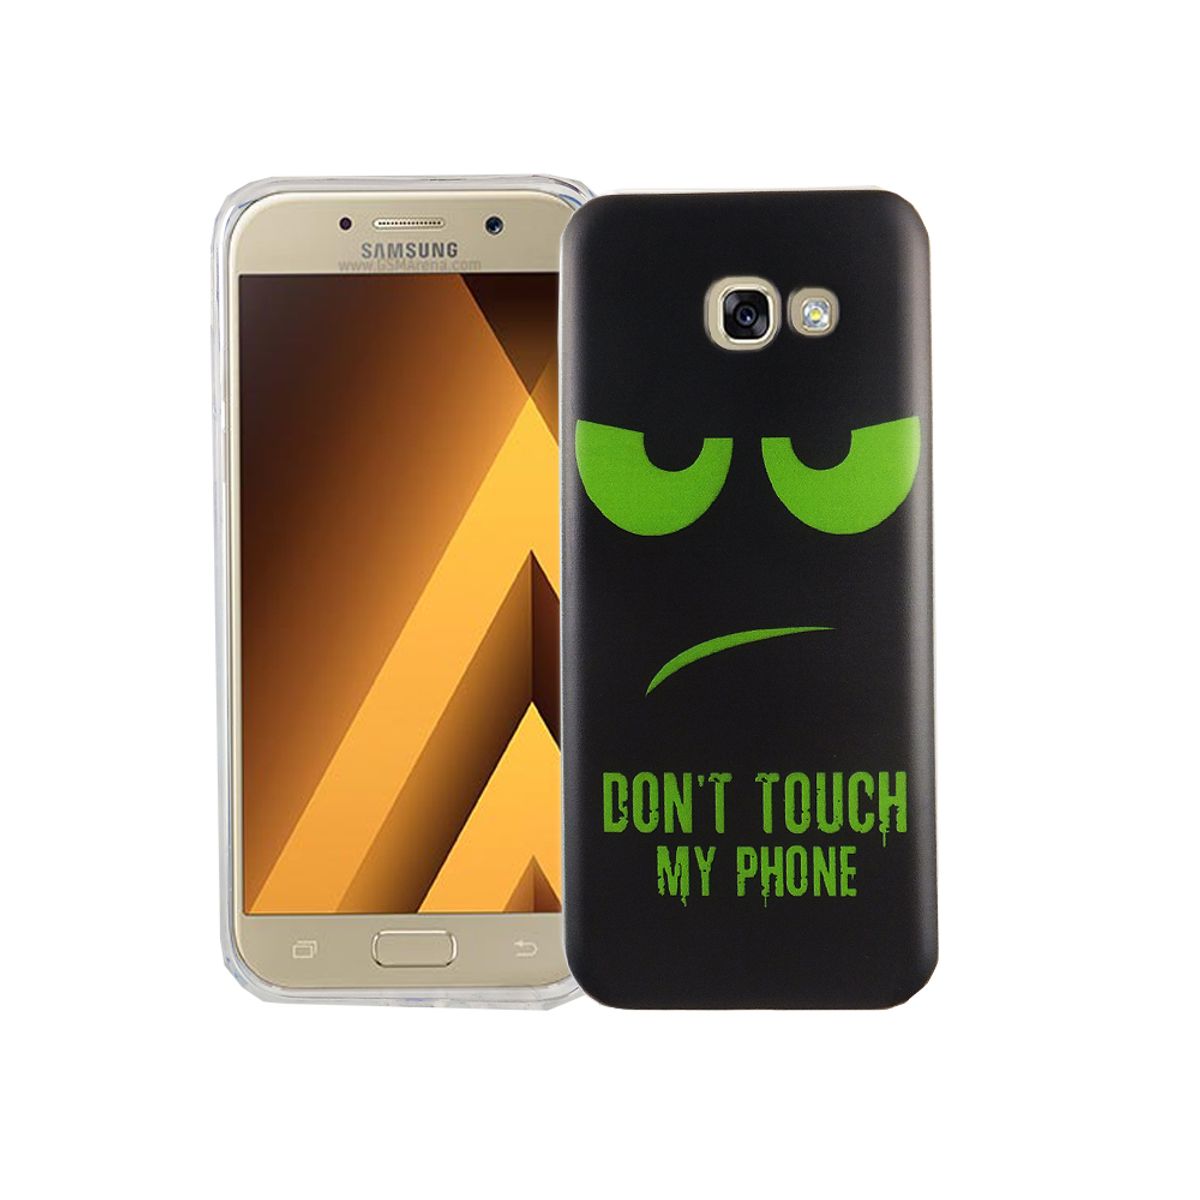 König Design Mobile Phone Case Protective Case Samsung Galaxy A5 2017 Don't touch my Phone Green Black Smartphone Cover Bumper Shell Cases